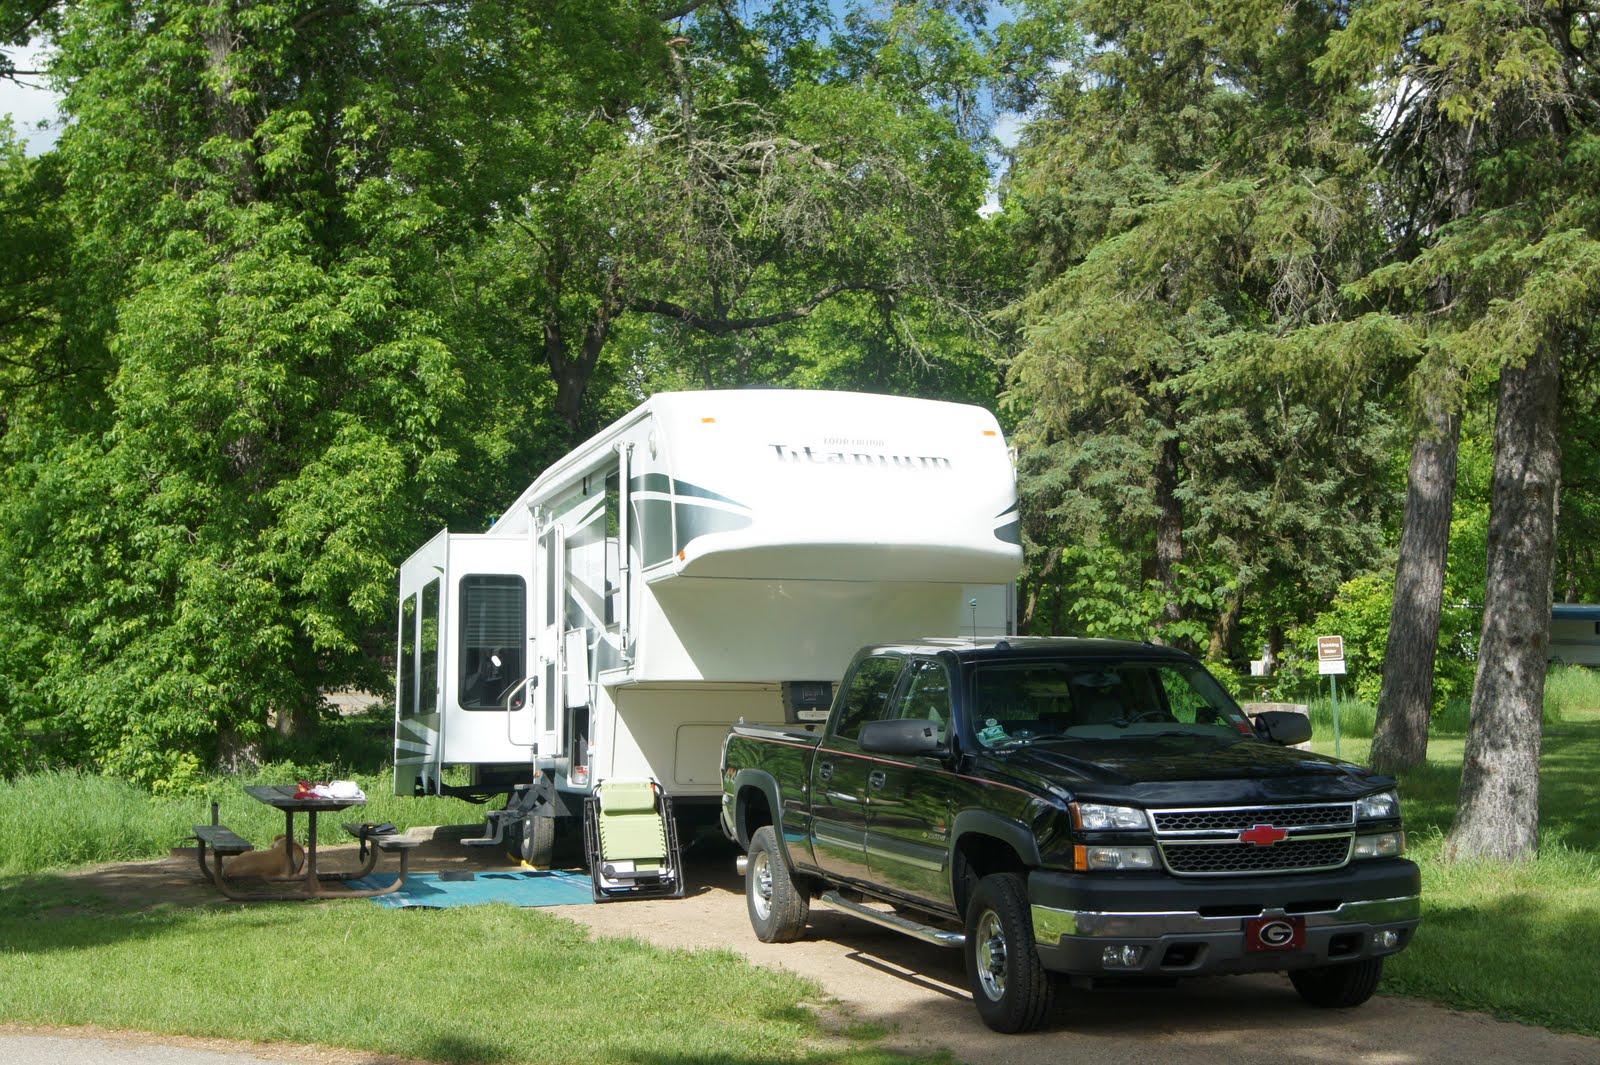 RV Campsites and Reviews: 6/7/2010 Itasca State Park, Park Rapids, MN Site 66